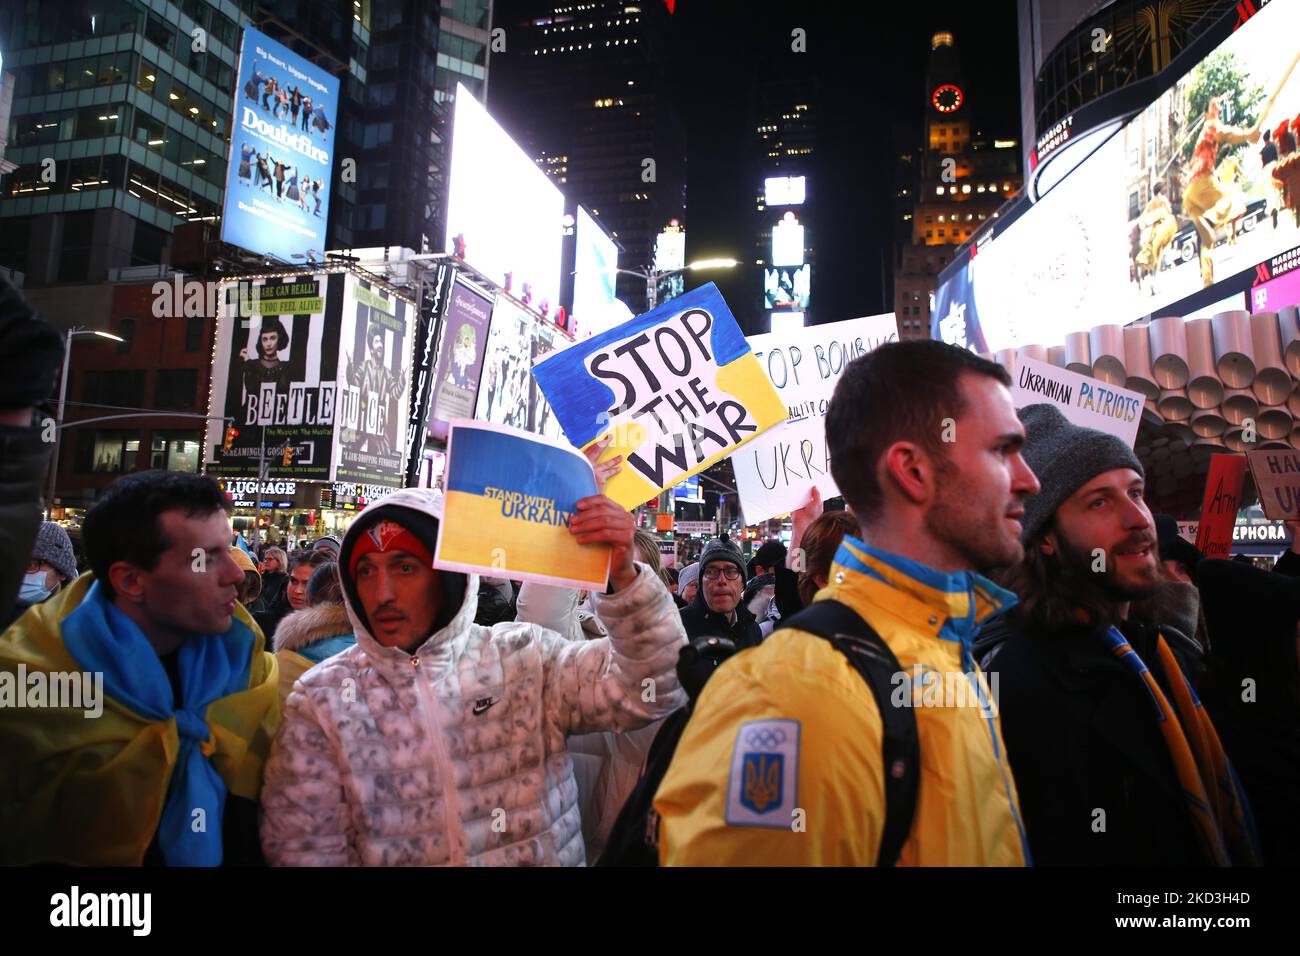 Ukraine supporters rally in Times Square holding flags, signs and chanting slogans on February 25, 2022 in New York City. People form Azerbaijan, Georgia and other indo-euroopean supporters gathered in solidarity against Russian President Vladimir Putin one day after he ordered the invasion of Ukraine. (Photo by John Lamparski/NurPhoto) Stock Photo